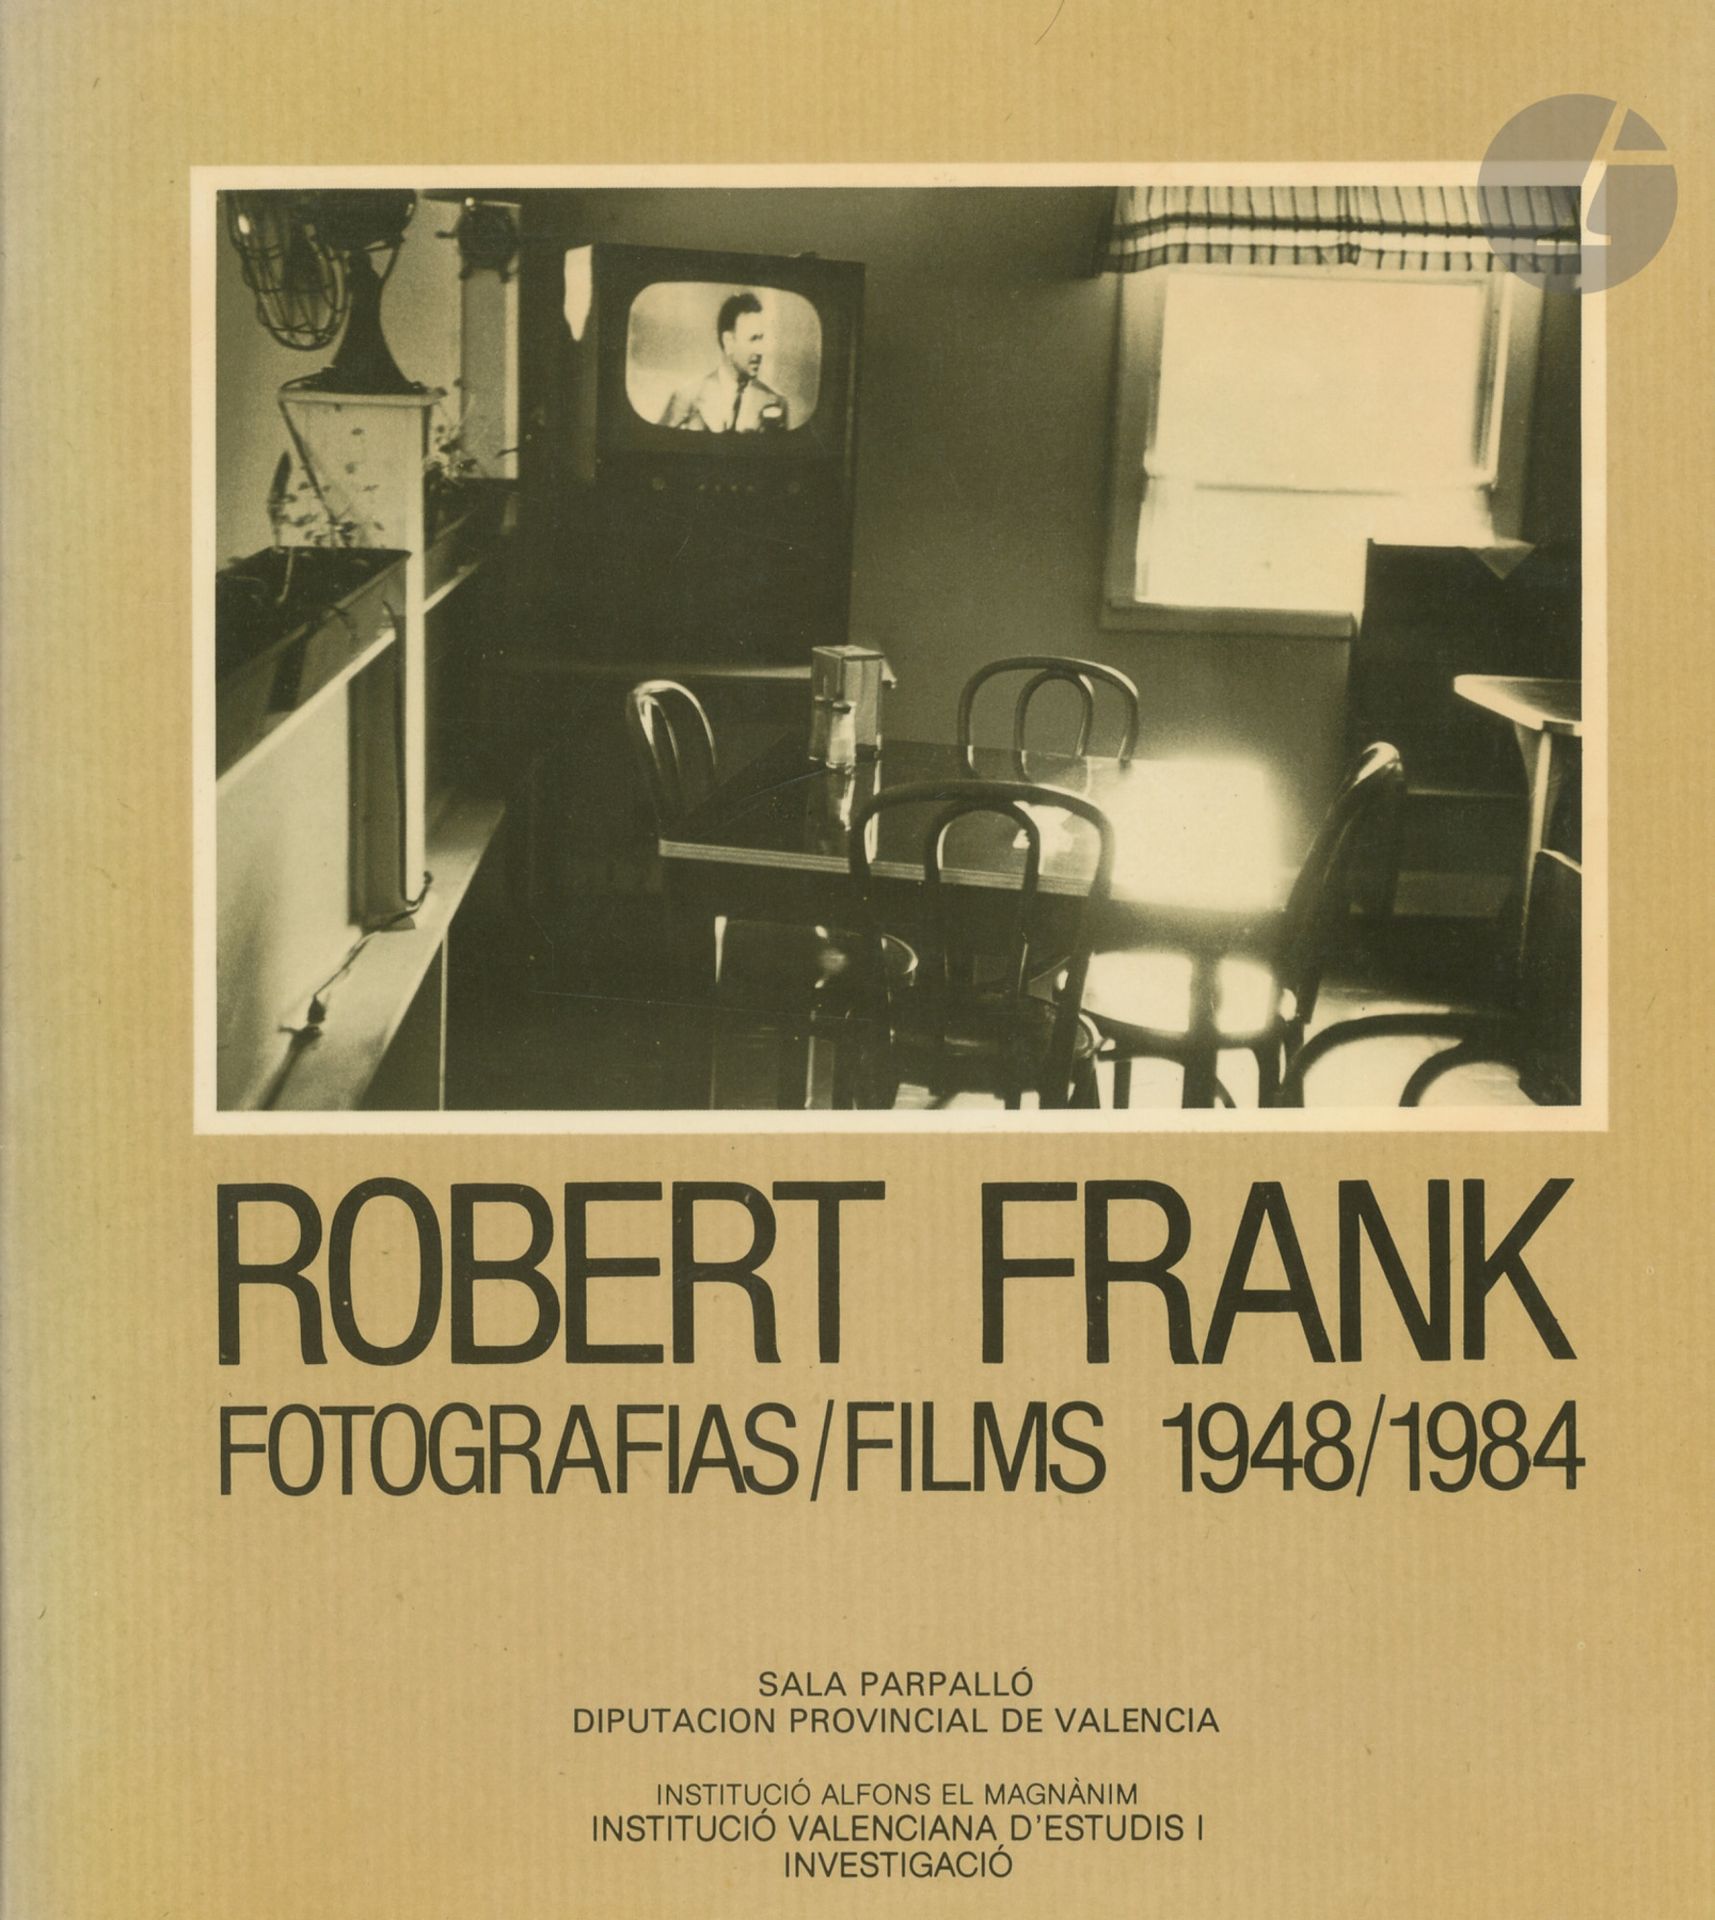 Null FRANK, ROBERT (1924-2019)
4 volumes.
*Black white and things.
National Gall&hellip;